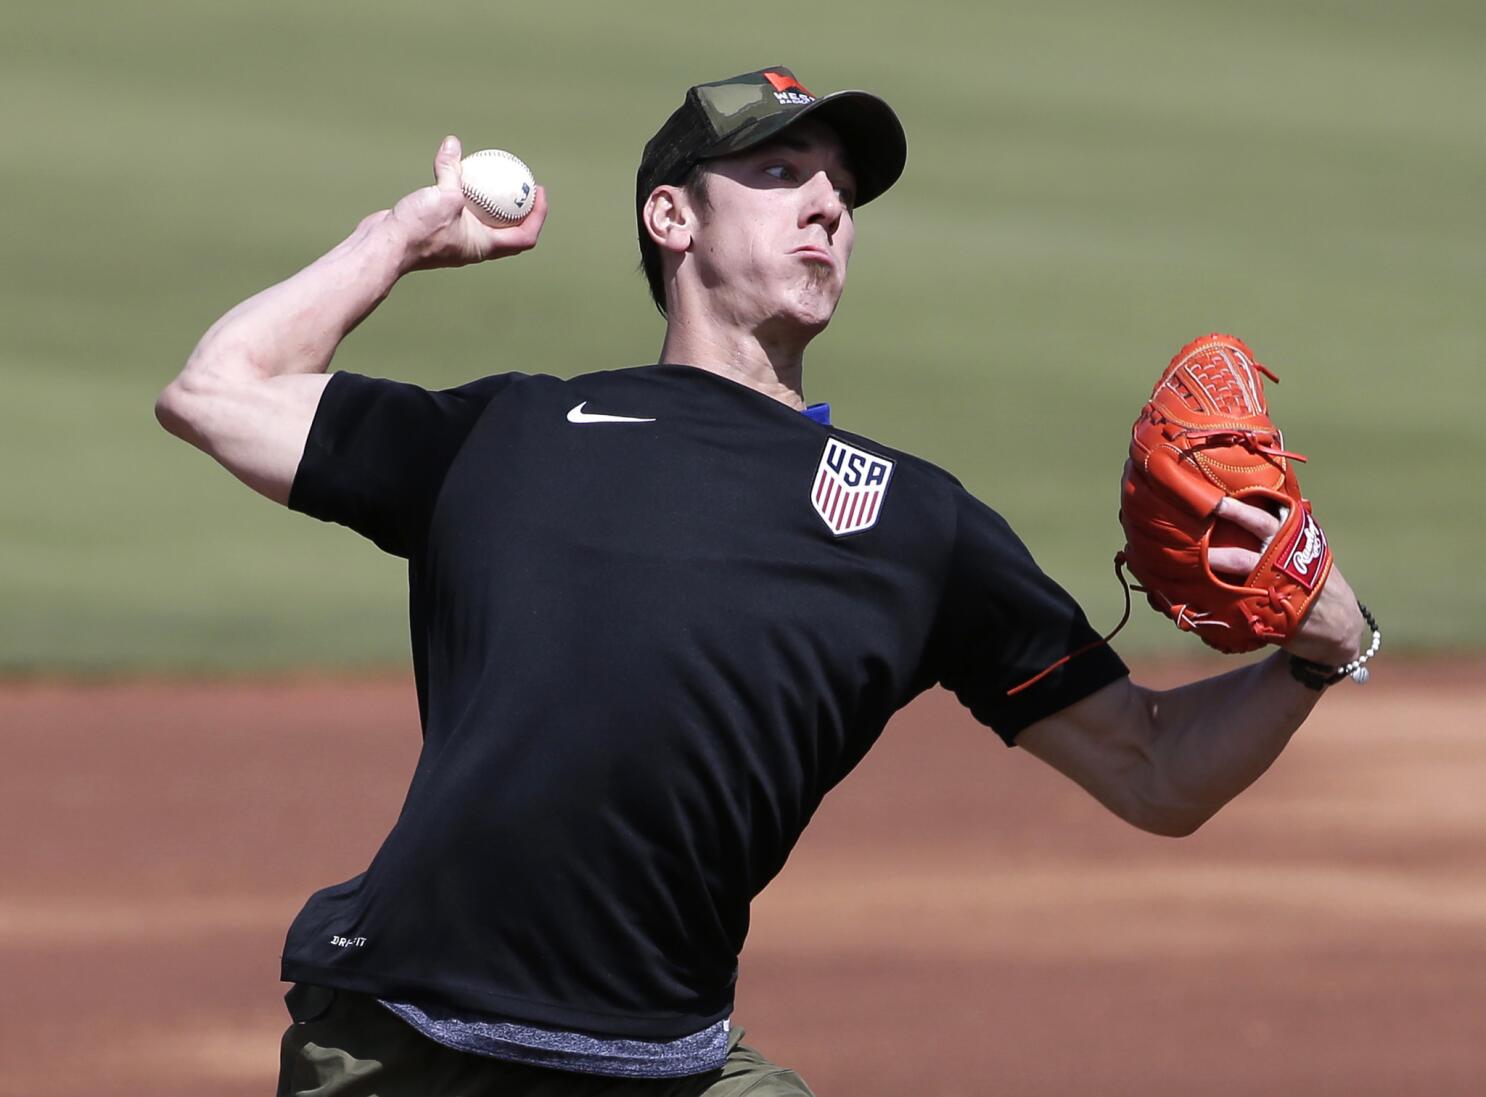 Tim Lincecum may not have spot in bullpen